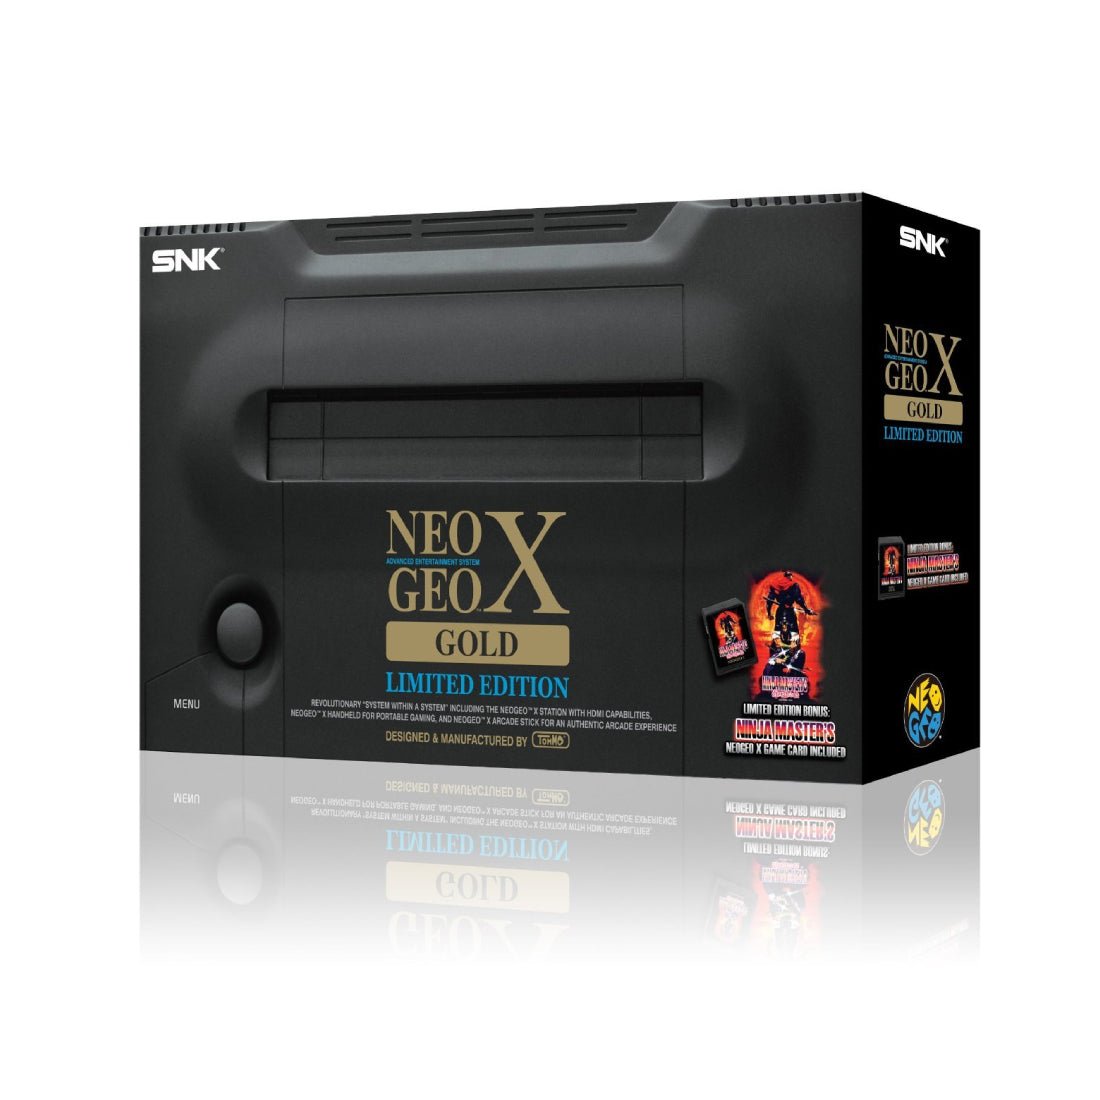 (Pre-Owned) NEOGEO X GOLD Console - Limited Edition - جهاز ألعاب مستعمل - Store 974 | ستور ٩٧٤